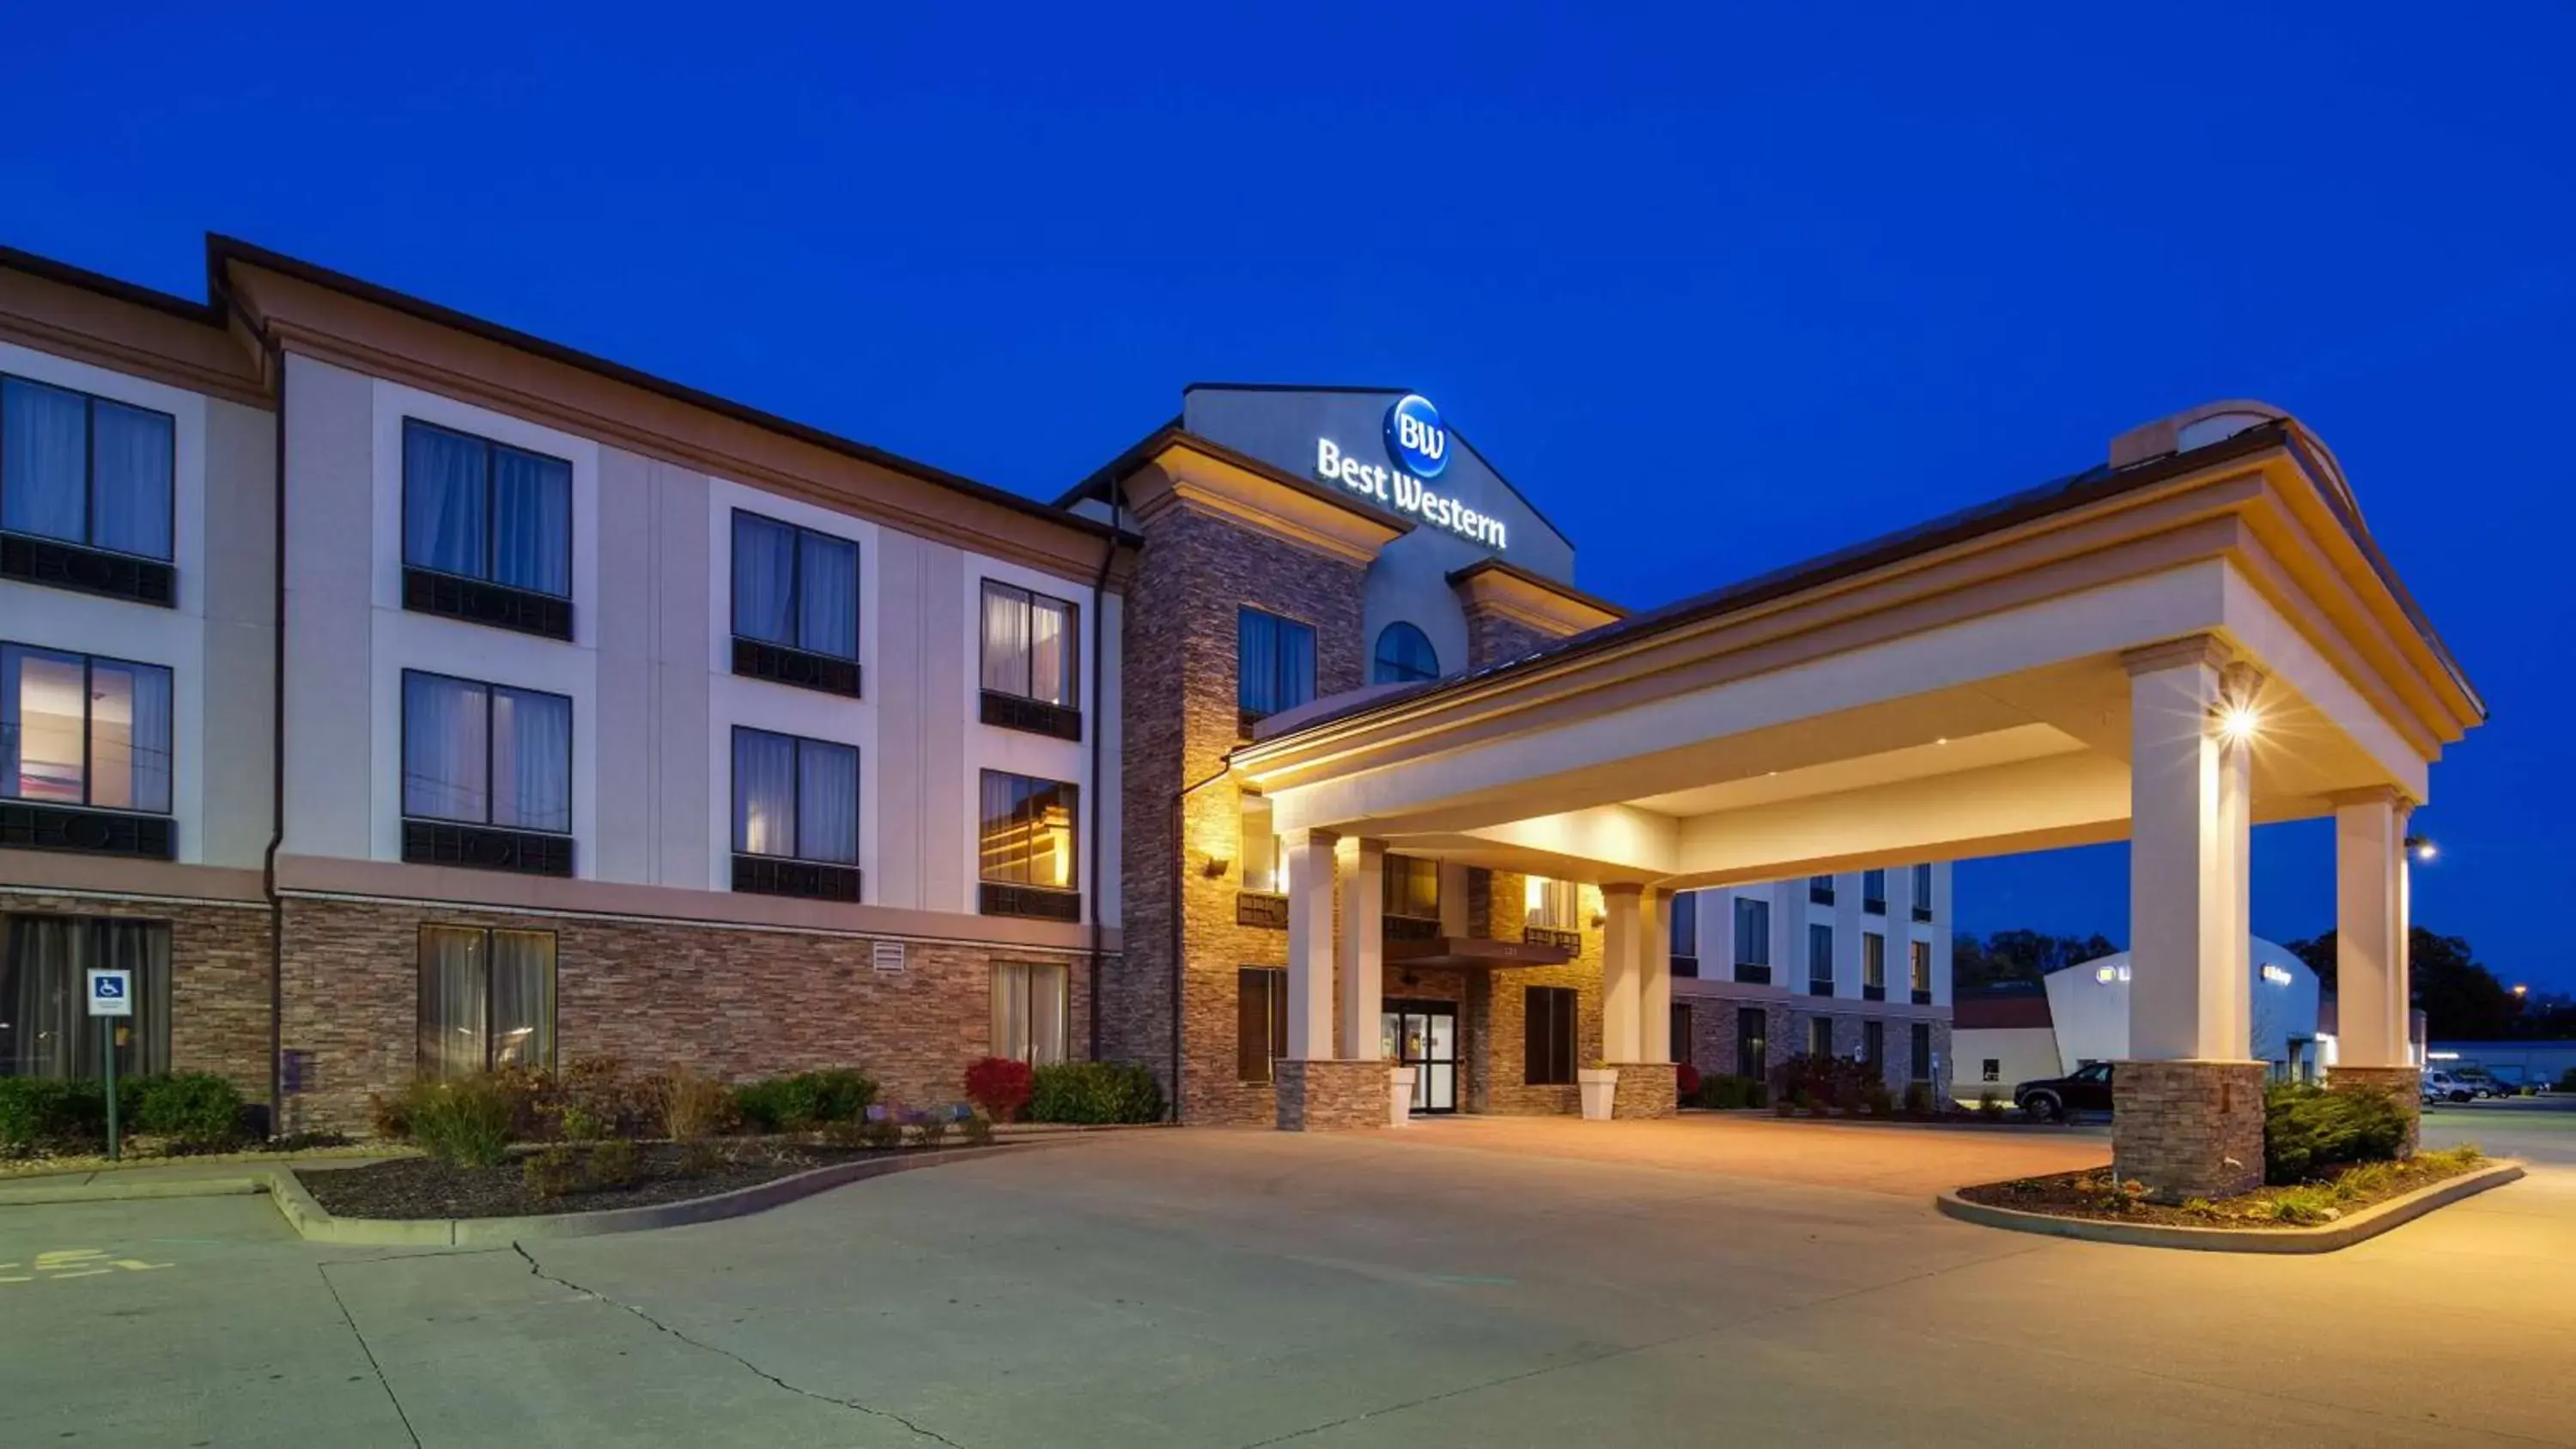 Property Building in Best Western St. Louis Airport North Hotel & Suites